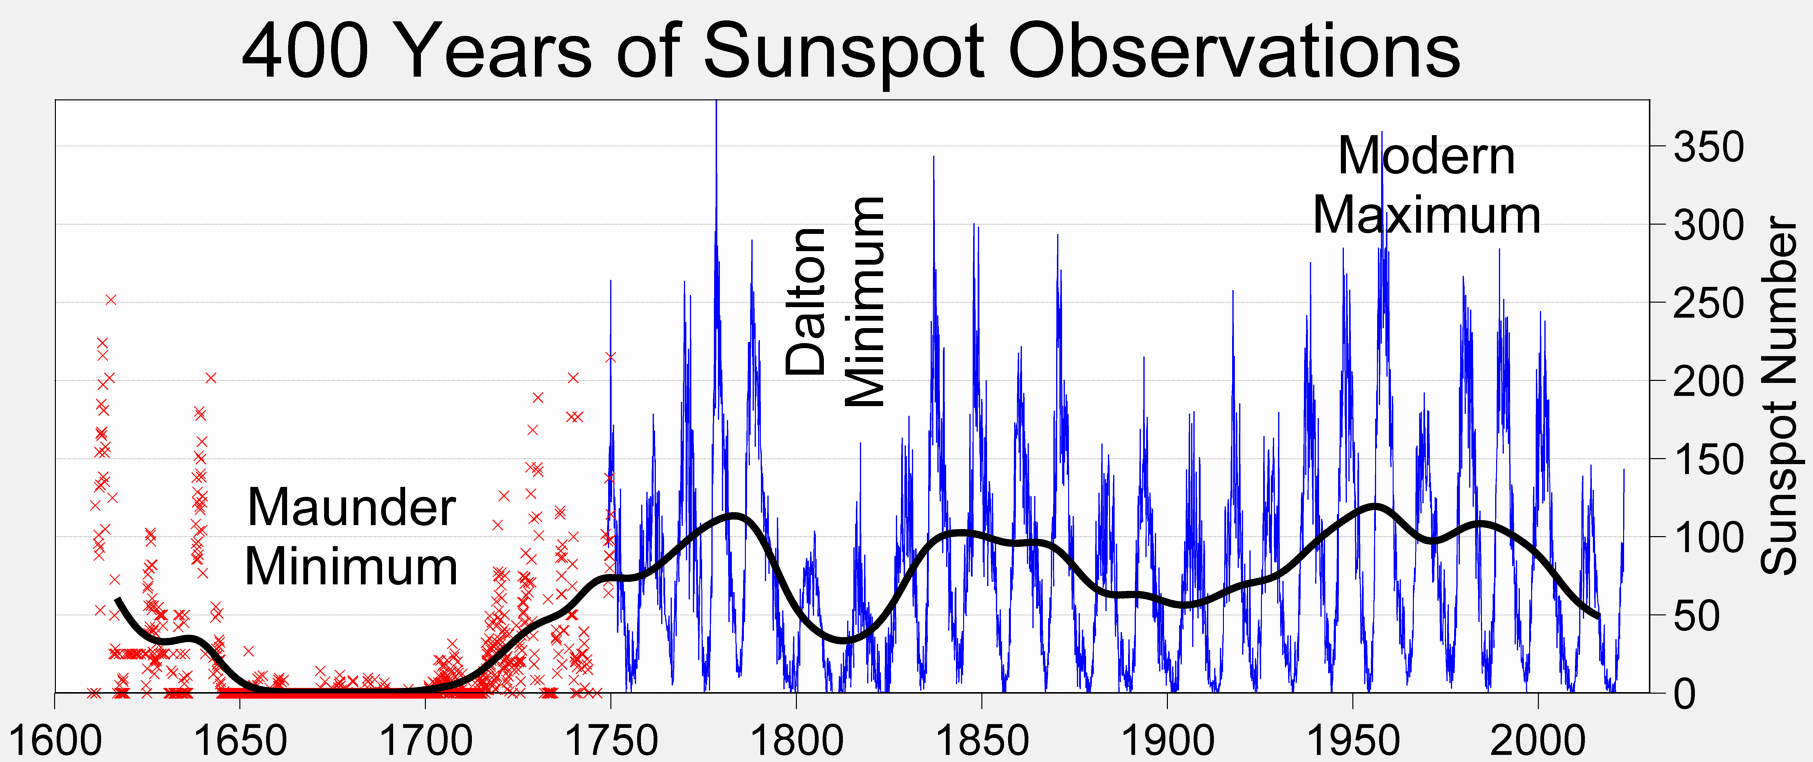 <p>Between the years 1645 and 1715, the Sun was relatively inactive and very few sunspots were observed; this period corresponds with a period of extremely cold winters in Europe.</p>